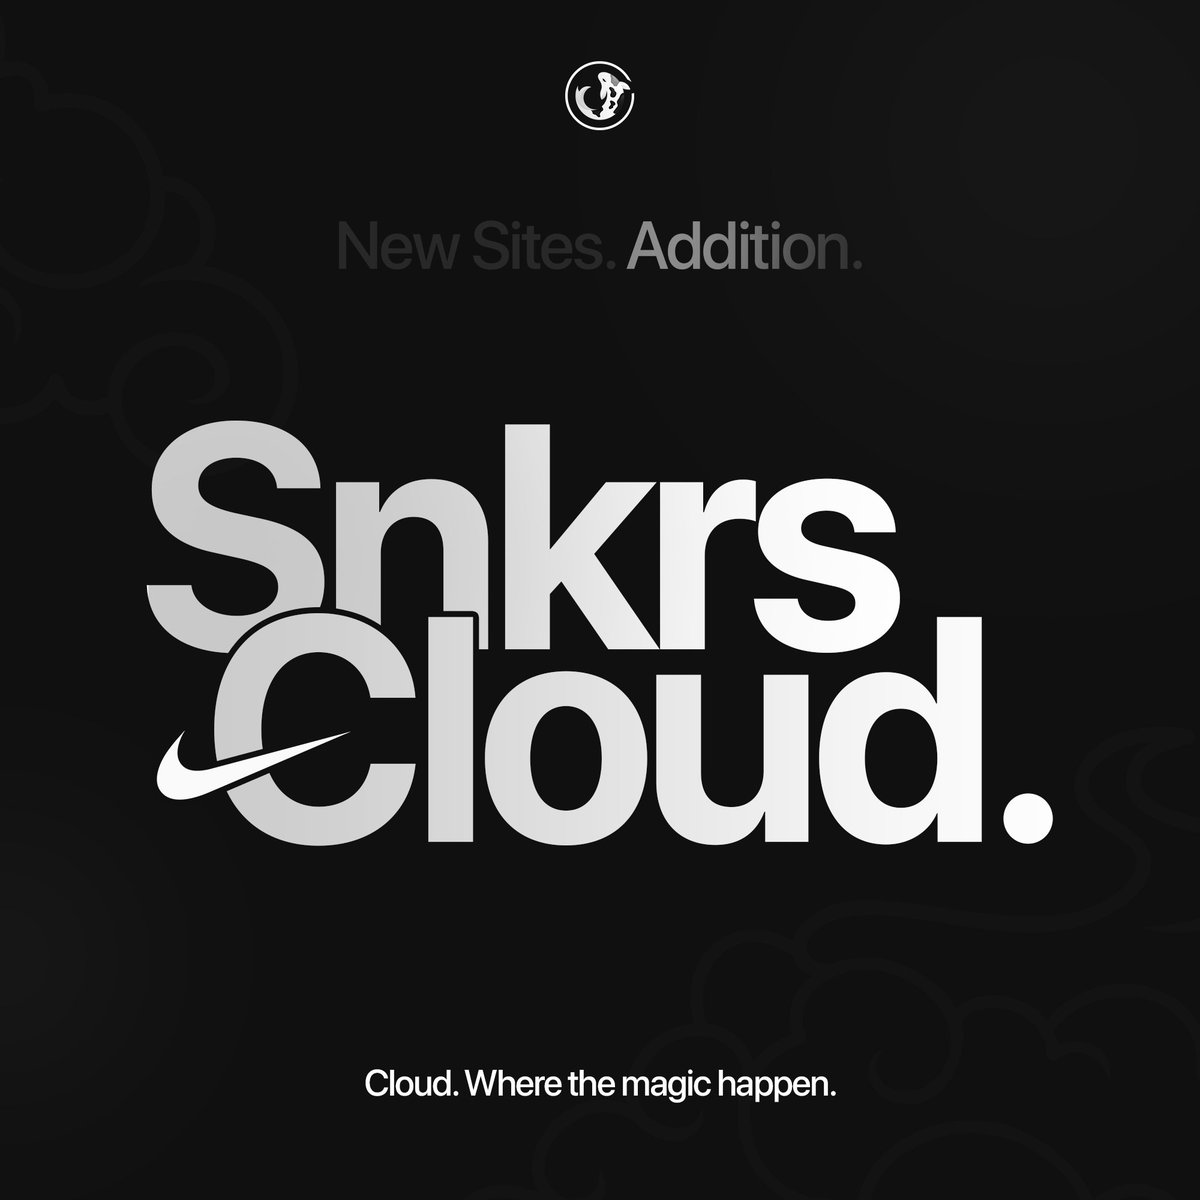 INTRODUCING SNKRS CLOUD 🌊 🔺Blazing fast and reliable. 🔺Enter 1000s of entries in seconds using any machine. 🔺Browser based entries done fully in cloud rather than your own machine. + Much more 👨🏼‍🍳 US BETA NOW OPEN ✅🔁 - 2x Free LT Keys